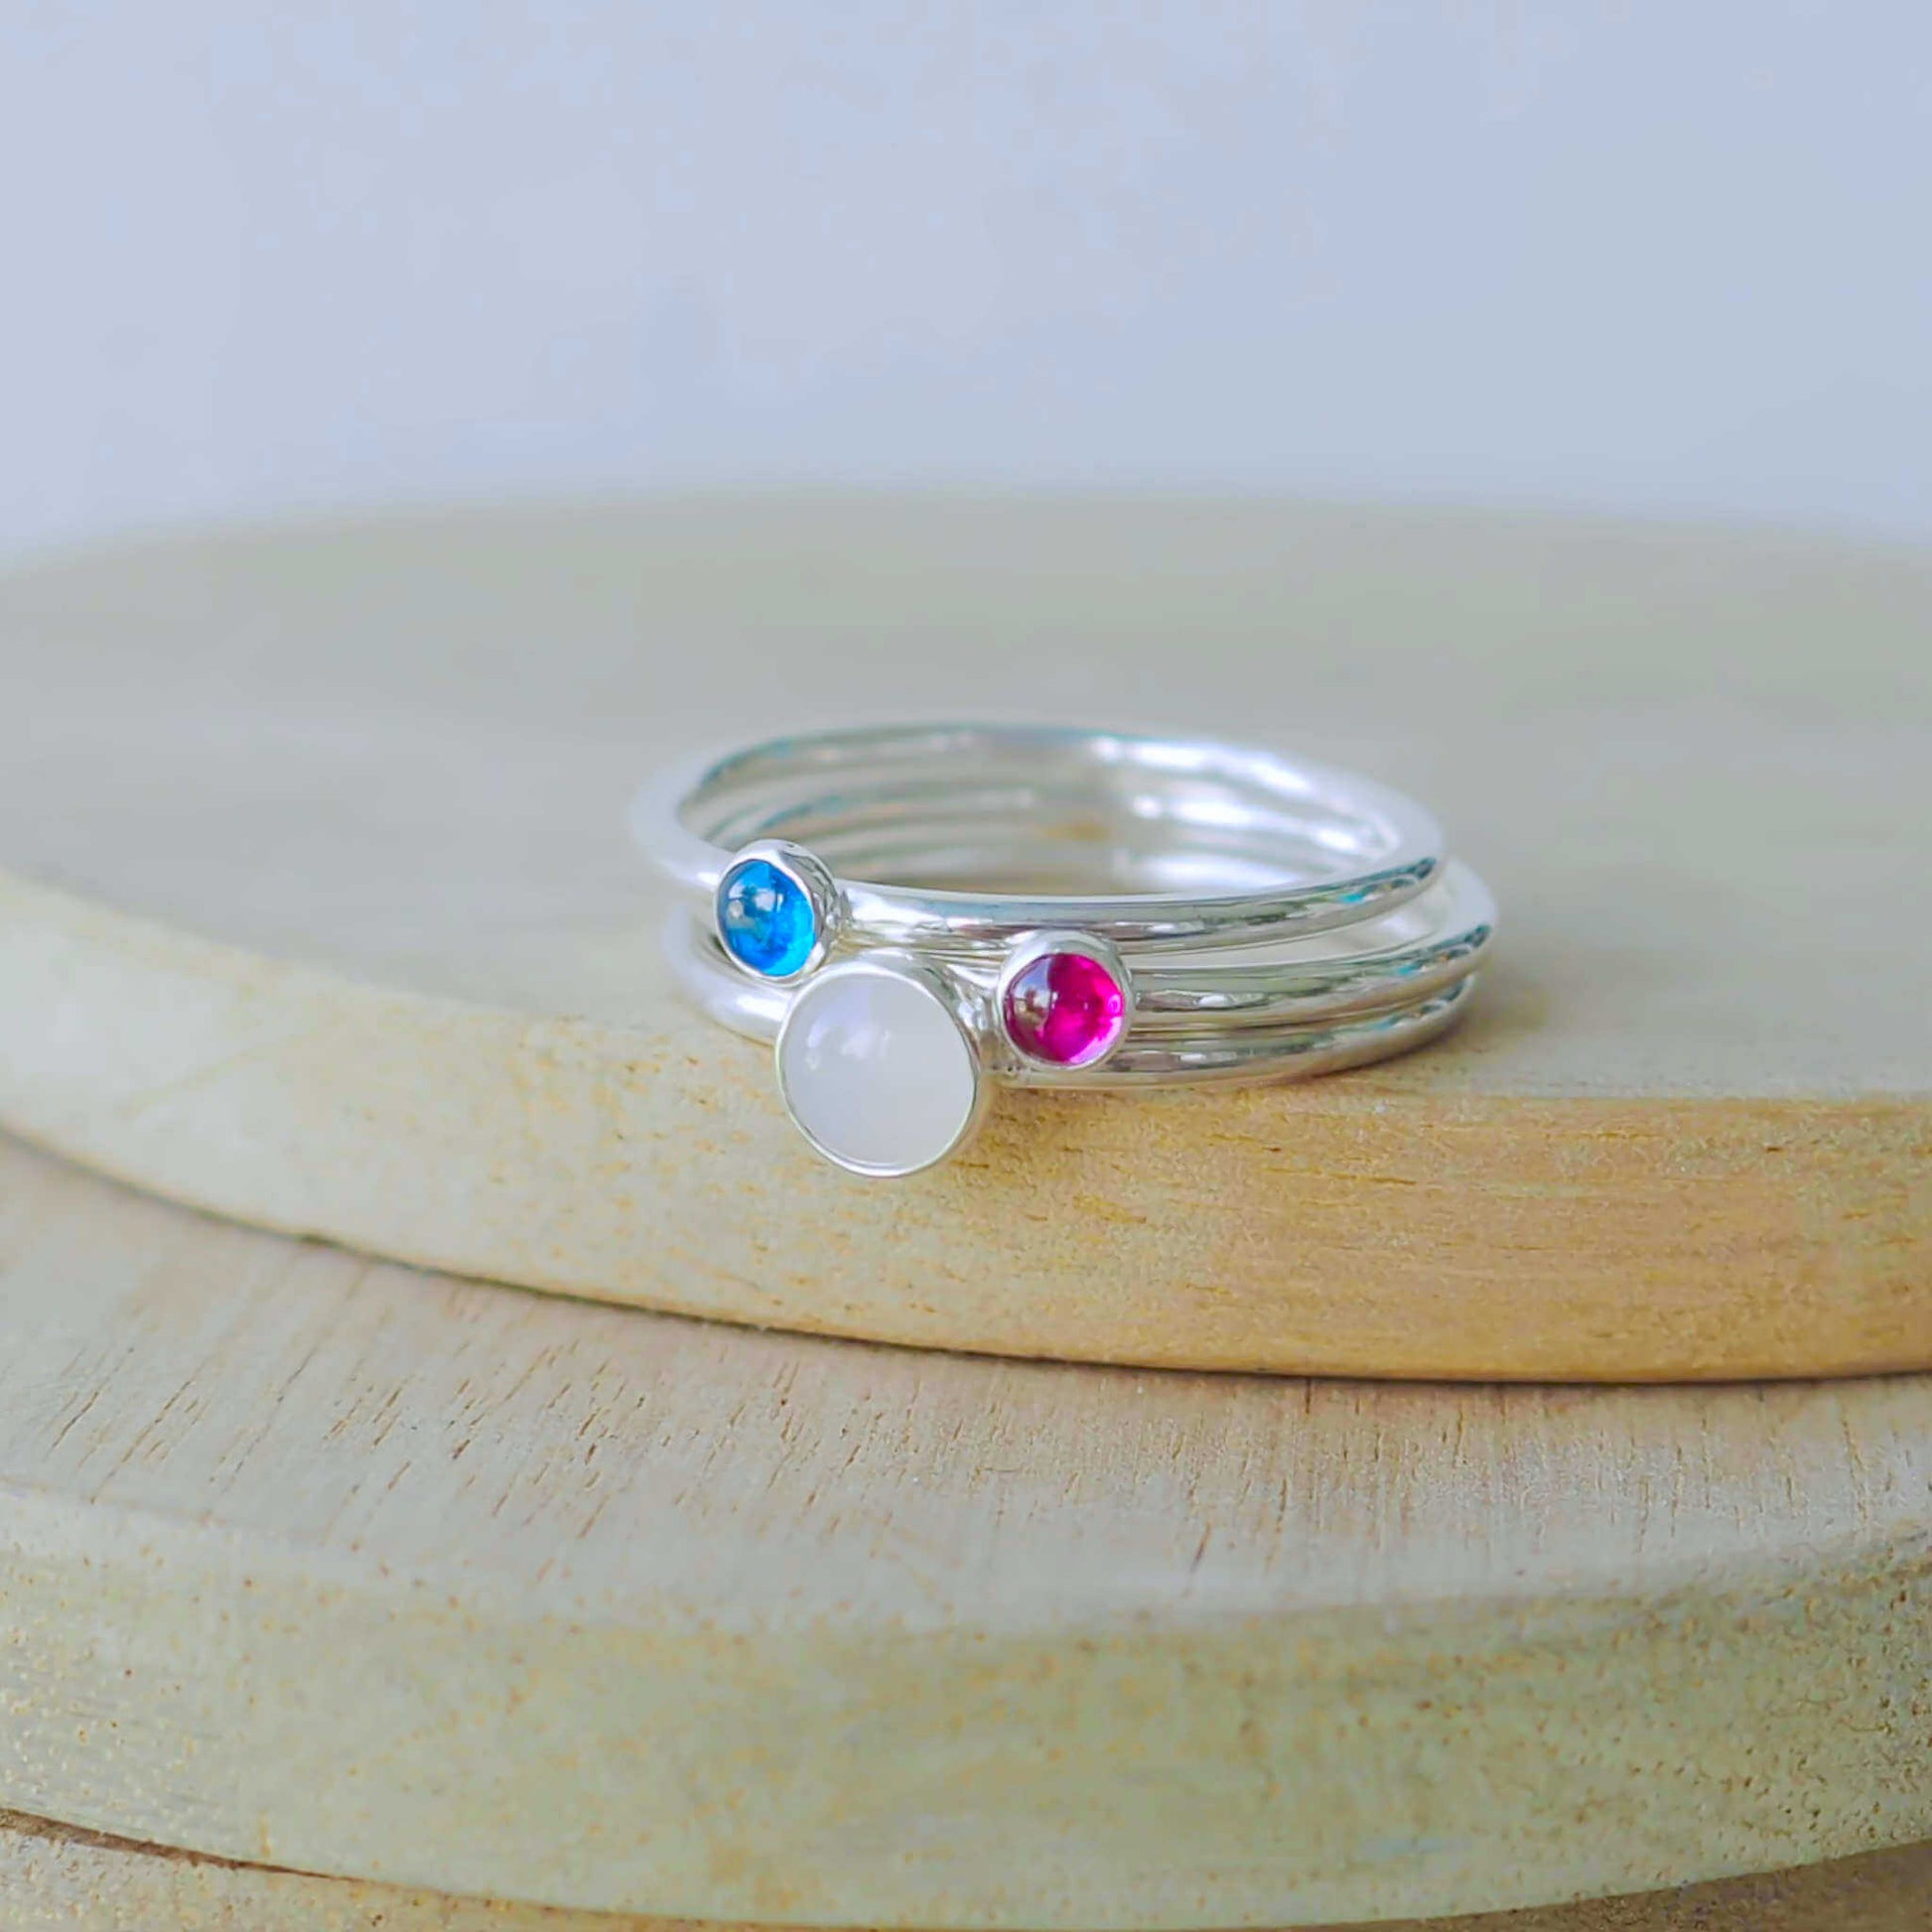 moonstone ruby and sapphire three ring set in sterling silver. Handmade in Scotland by maram jewellery